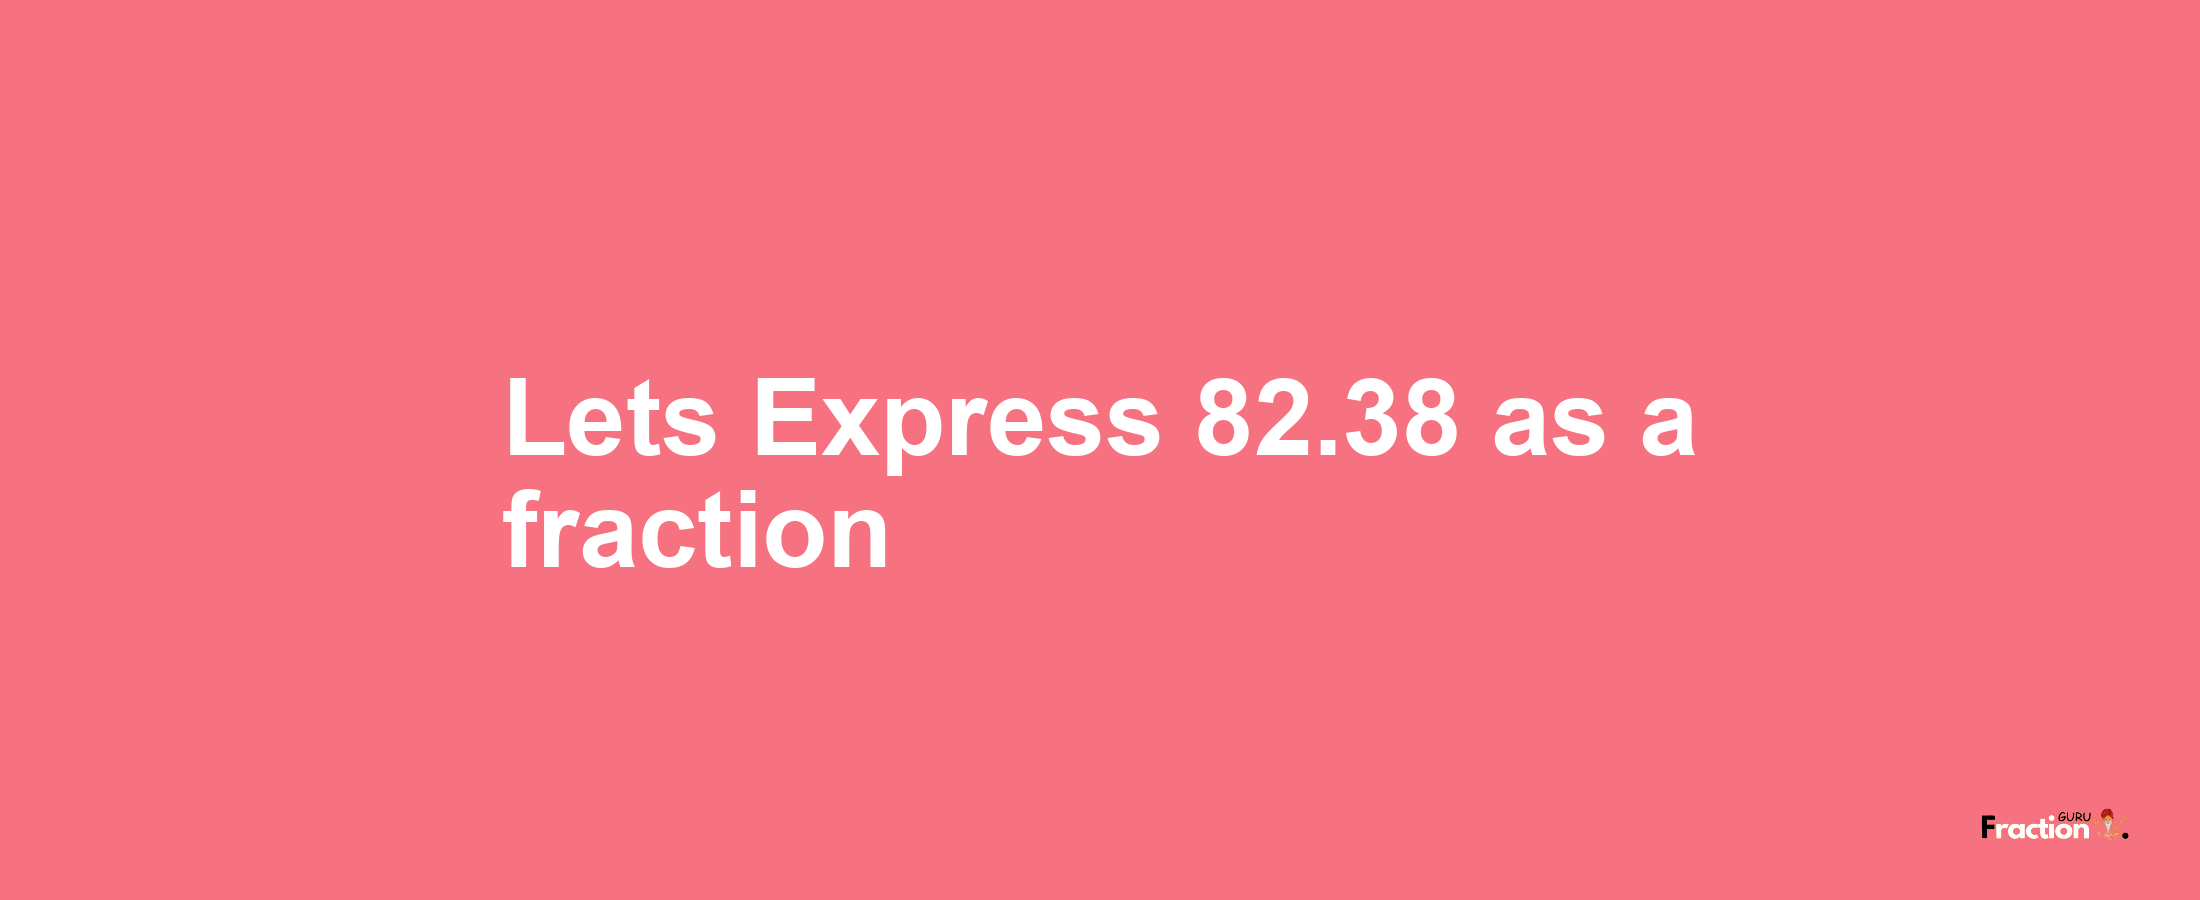 Lets Express 82.38 as afraction